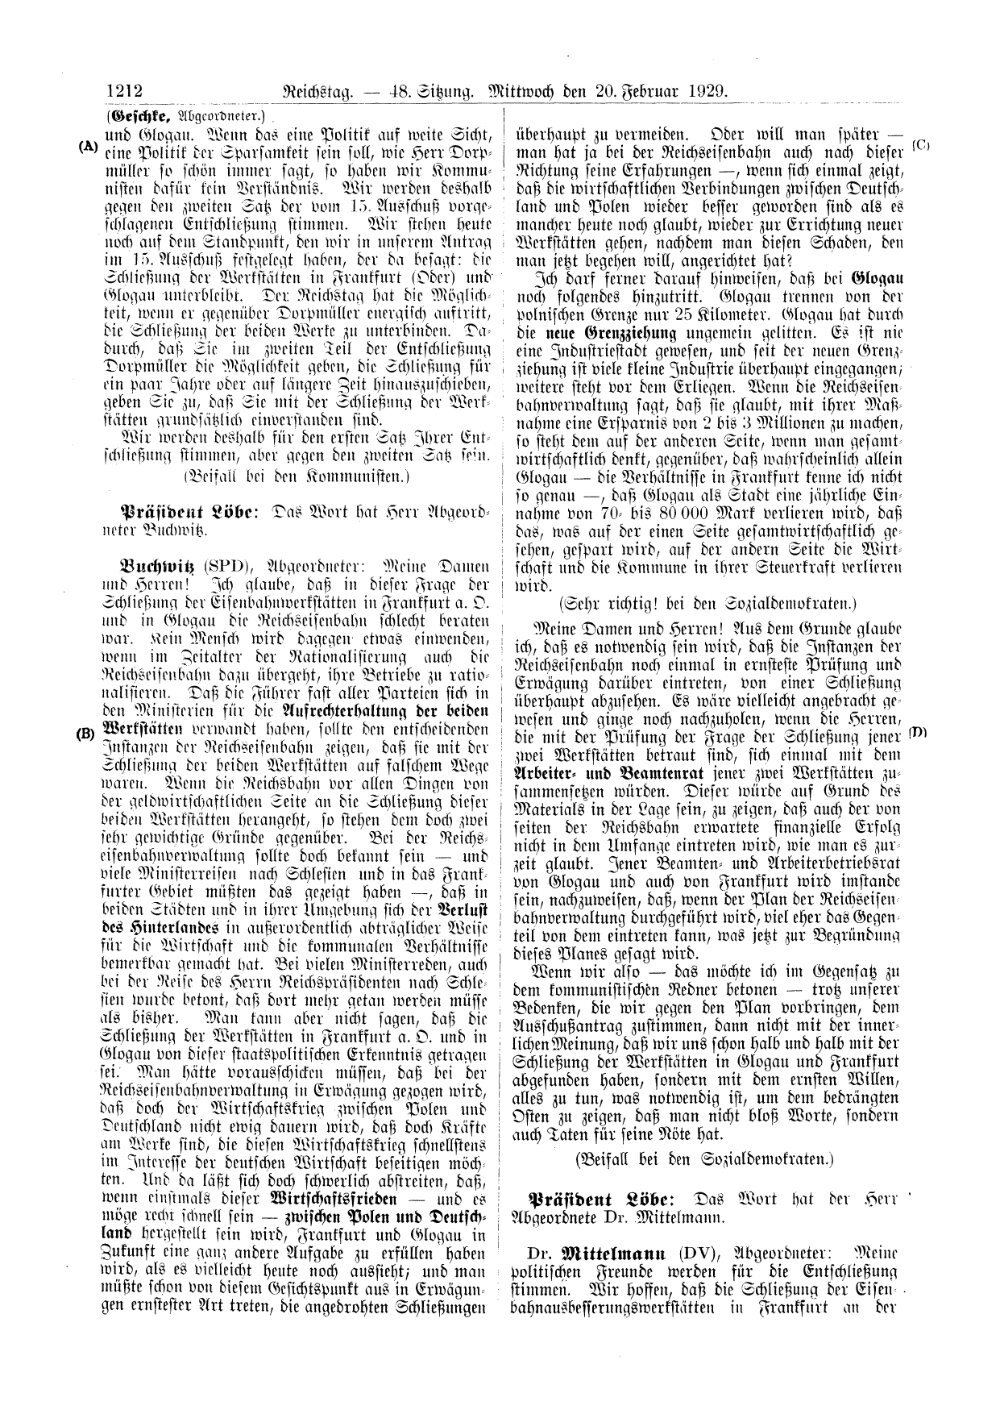 Scan of page 1212